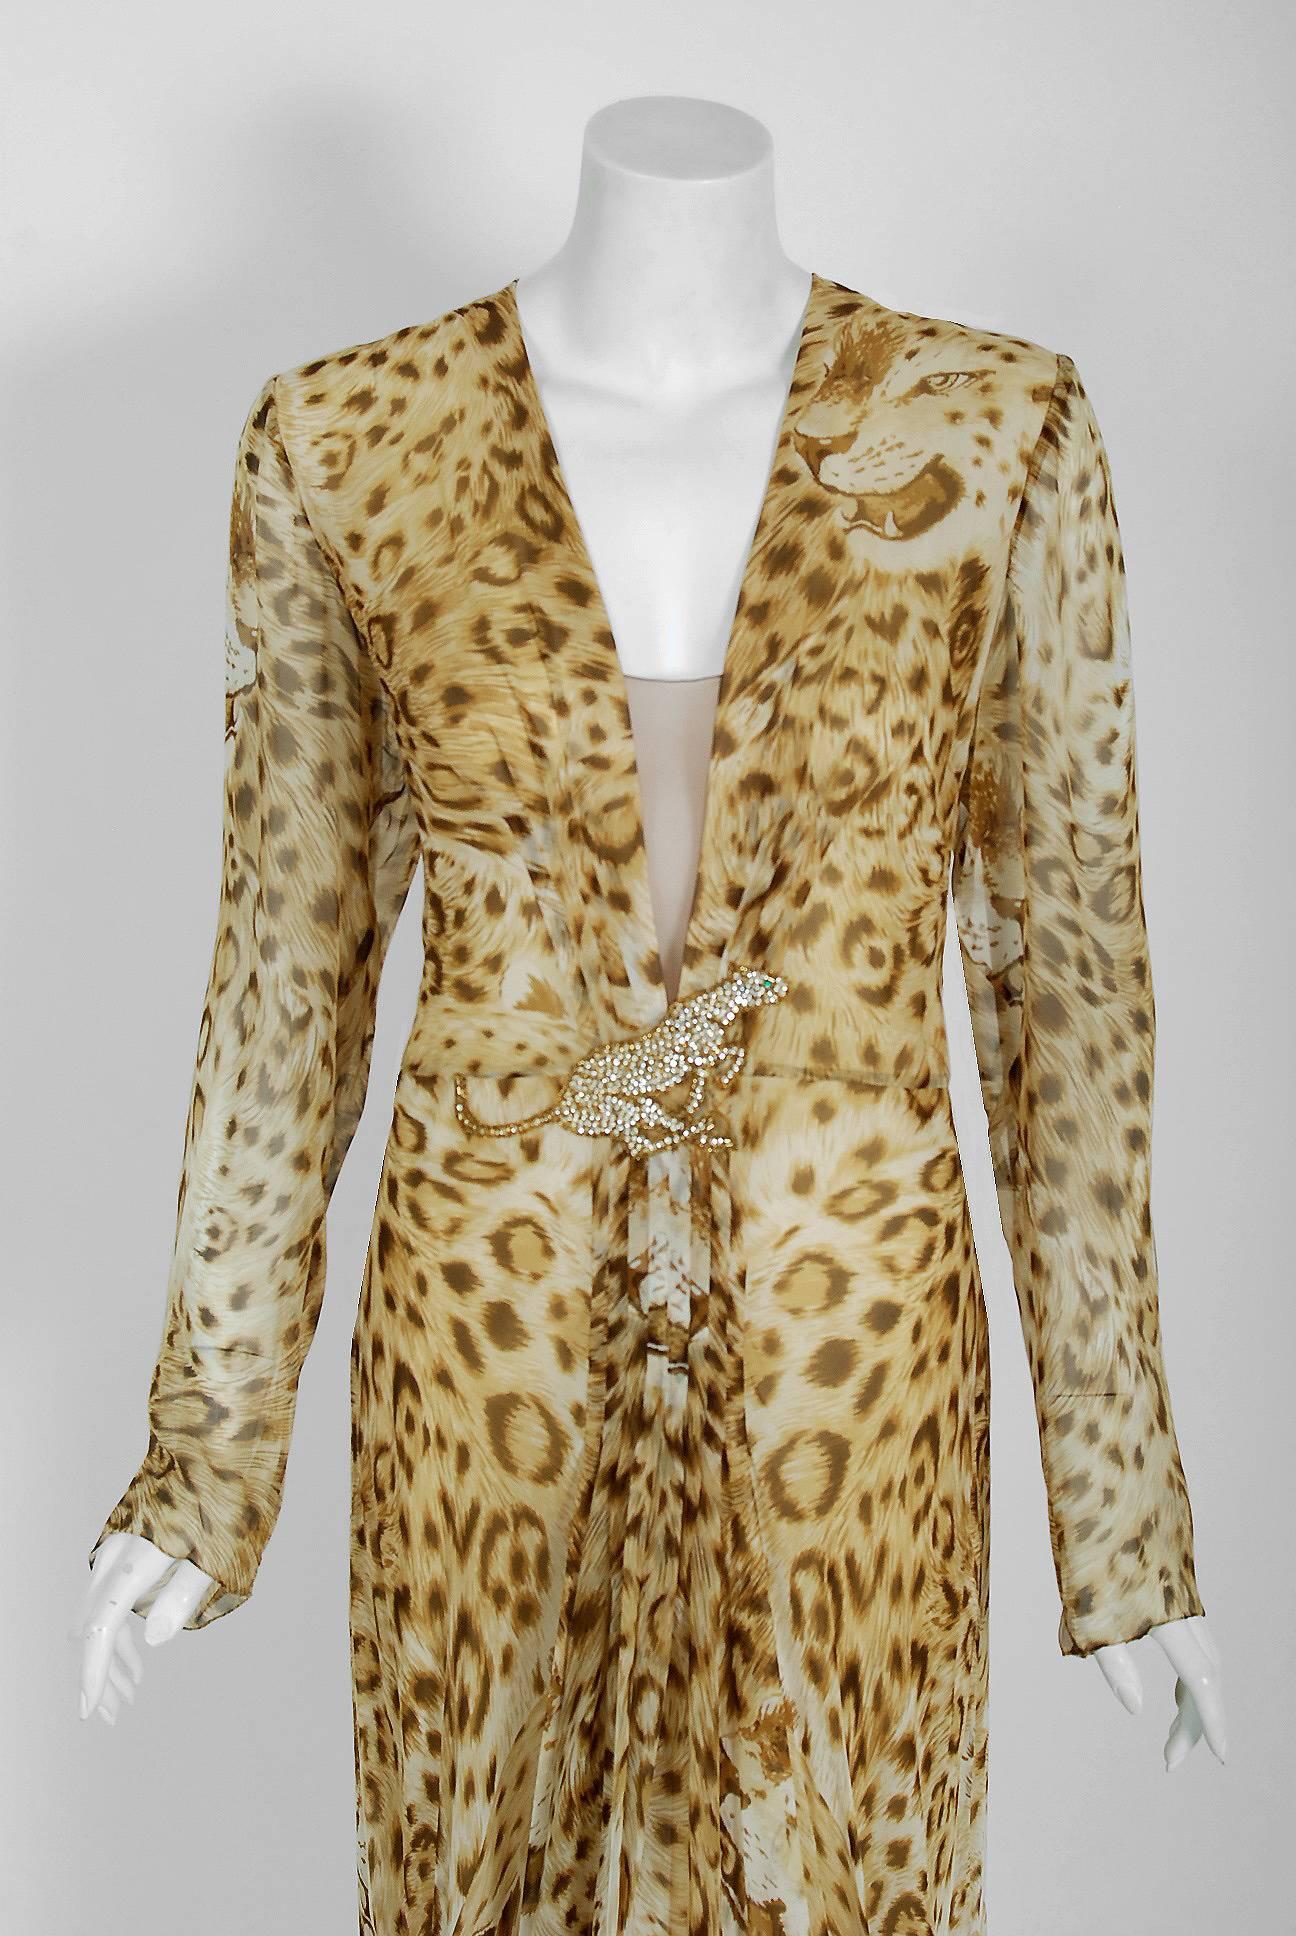 Breathtaking 1977 museum quality leopard print silk-chiffon dress by Hanae Mori. Whilst on a Paris holiday in 1960, Mori had a fateful fitting with Coco Chanel. She claimed this meeting changed her life and she challenged herself to realize her own